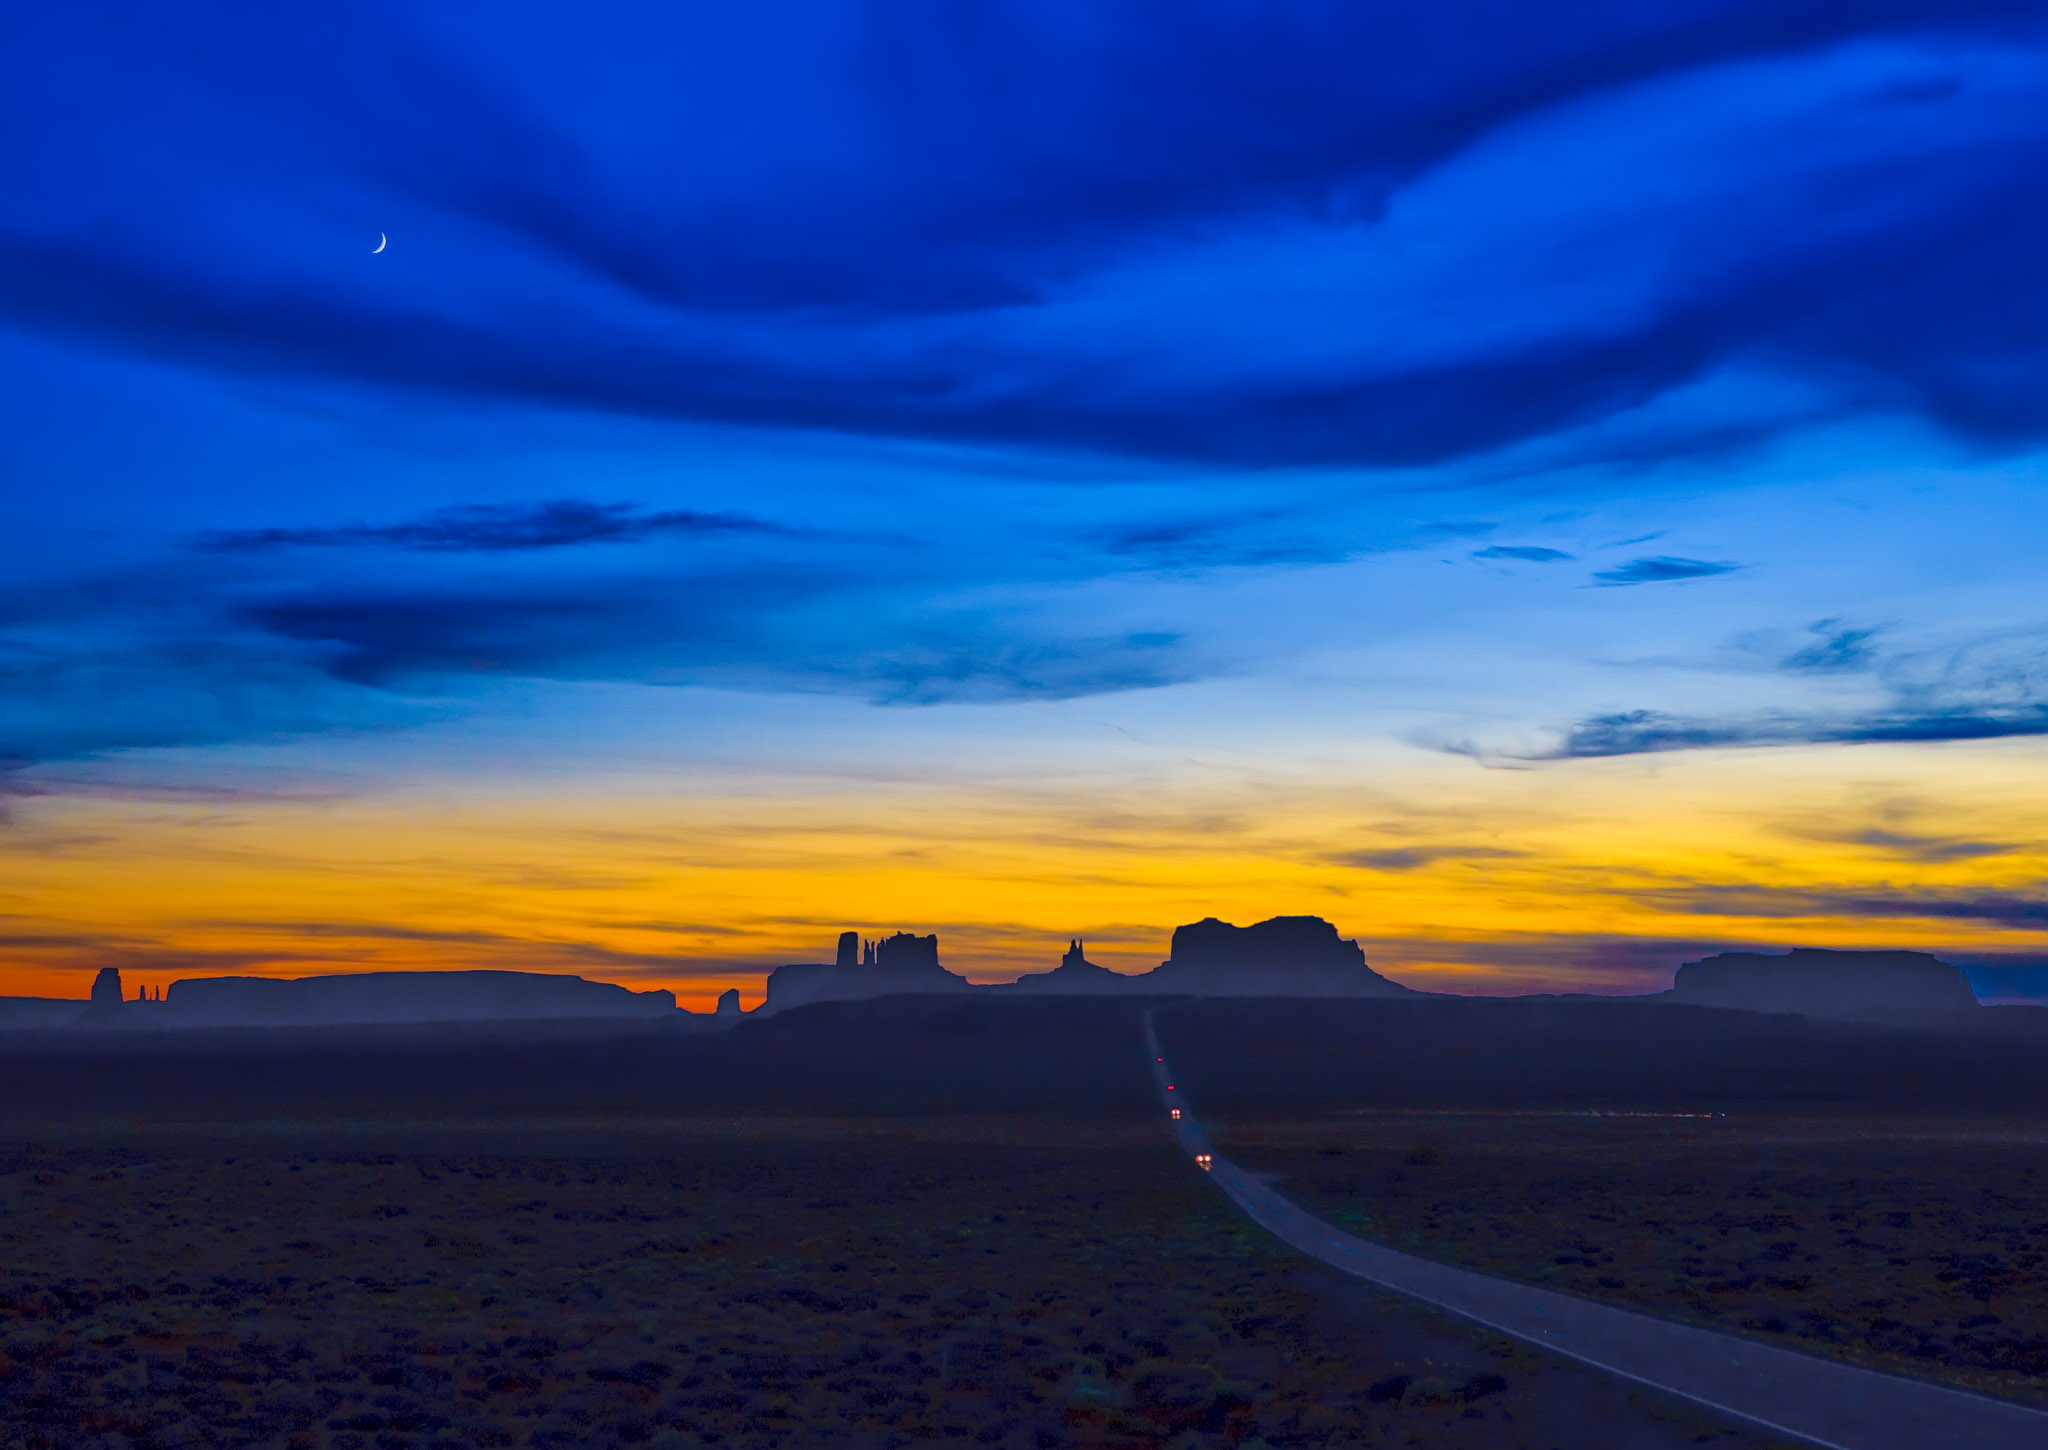 Monument Valley at twilight from U.S. Highway 163